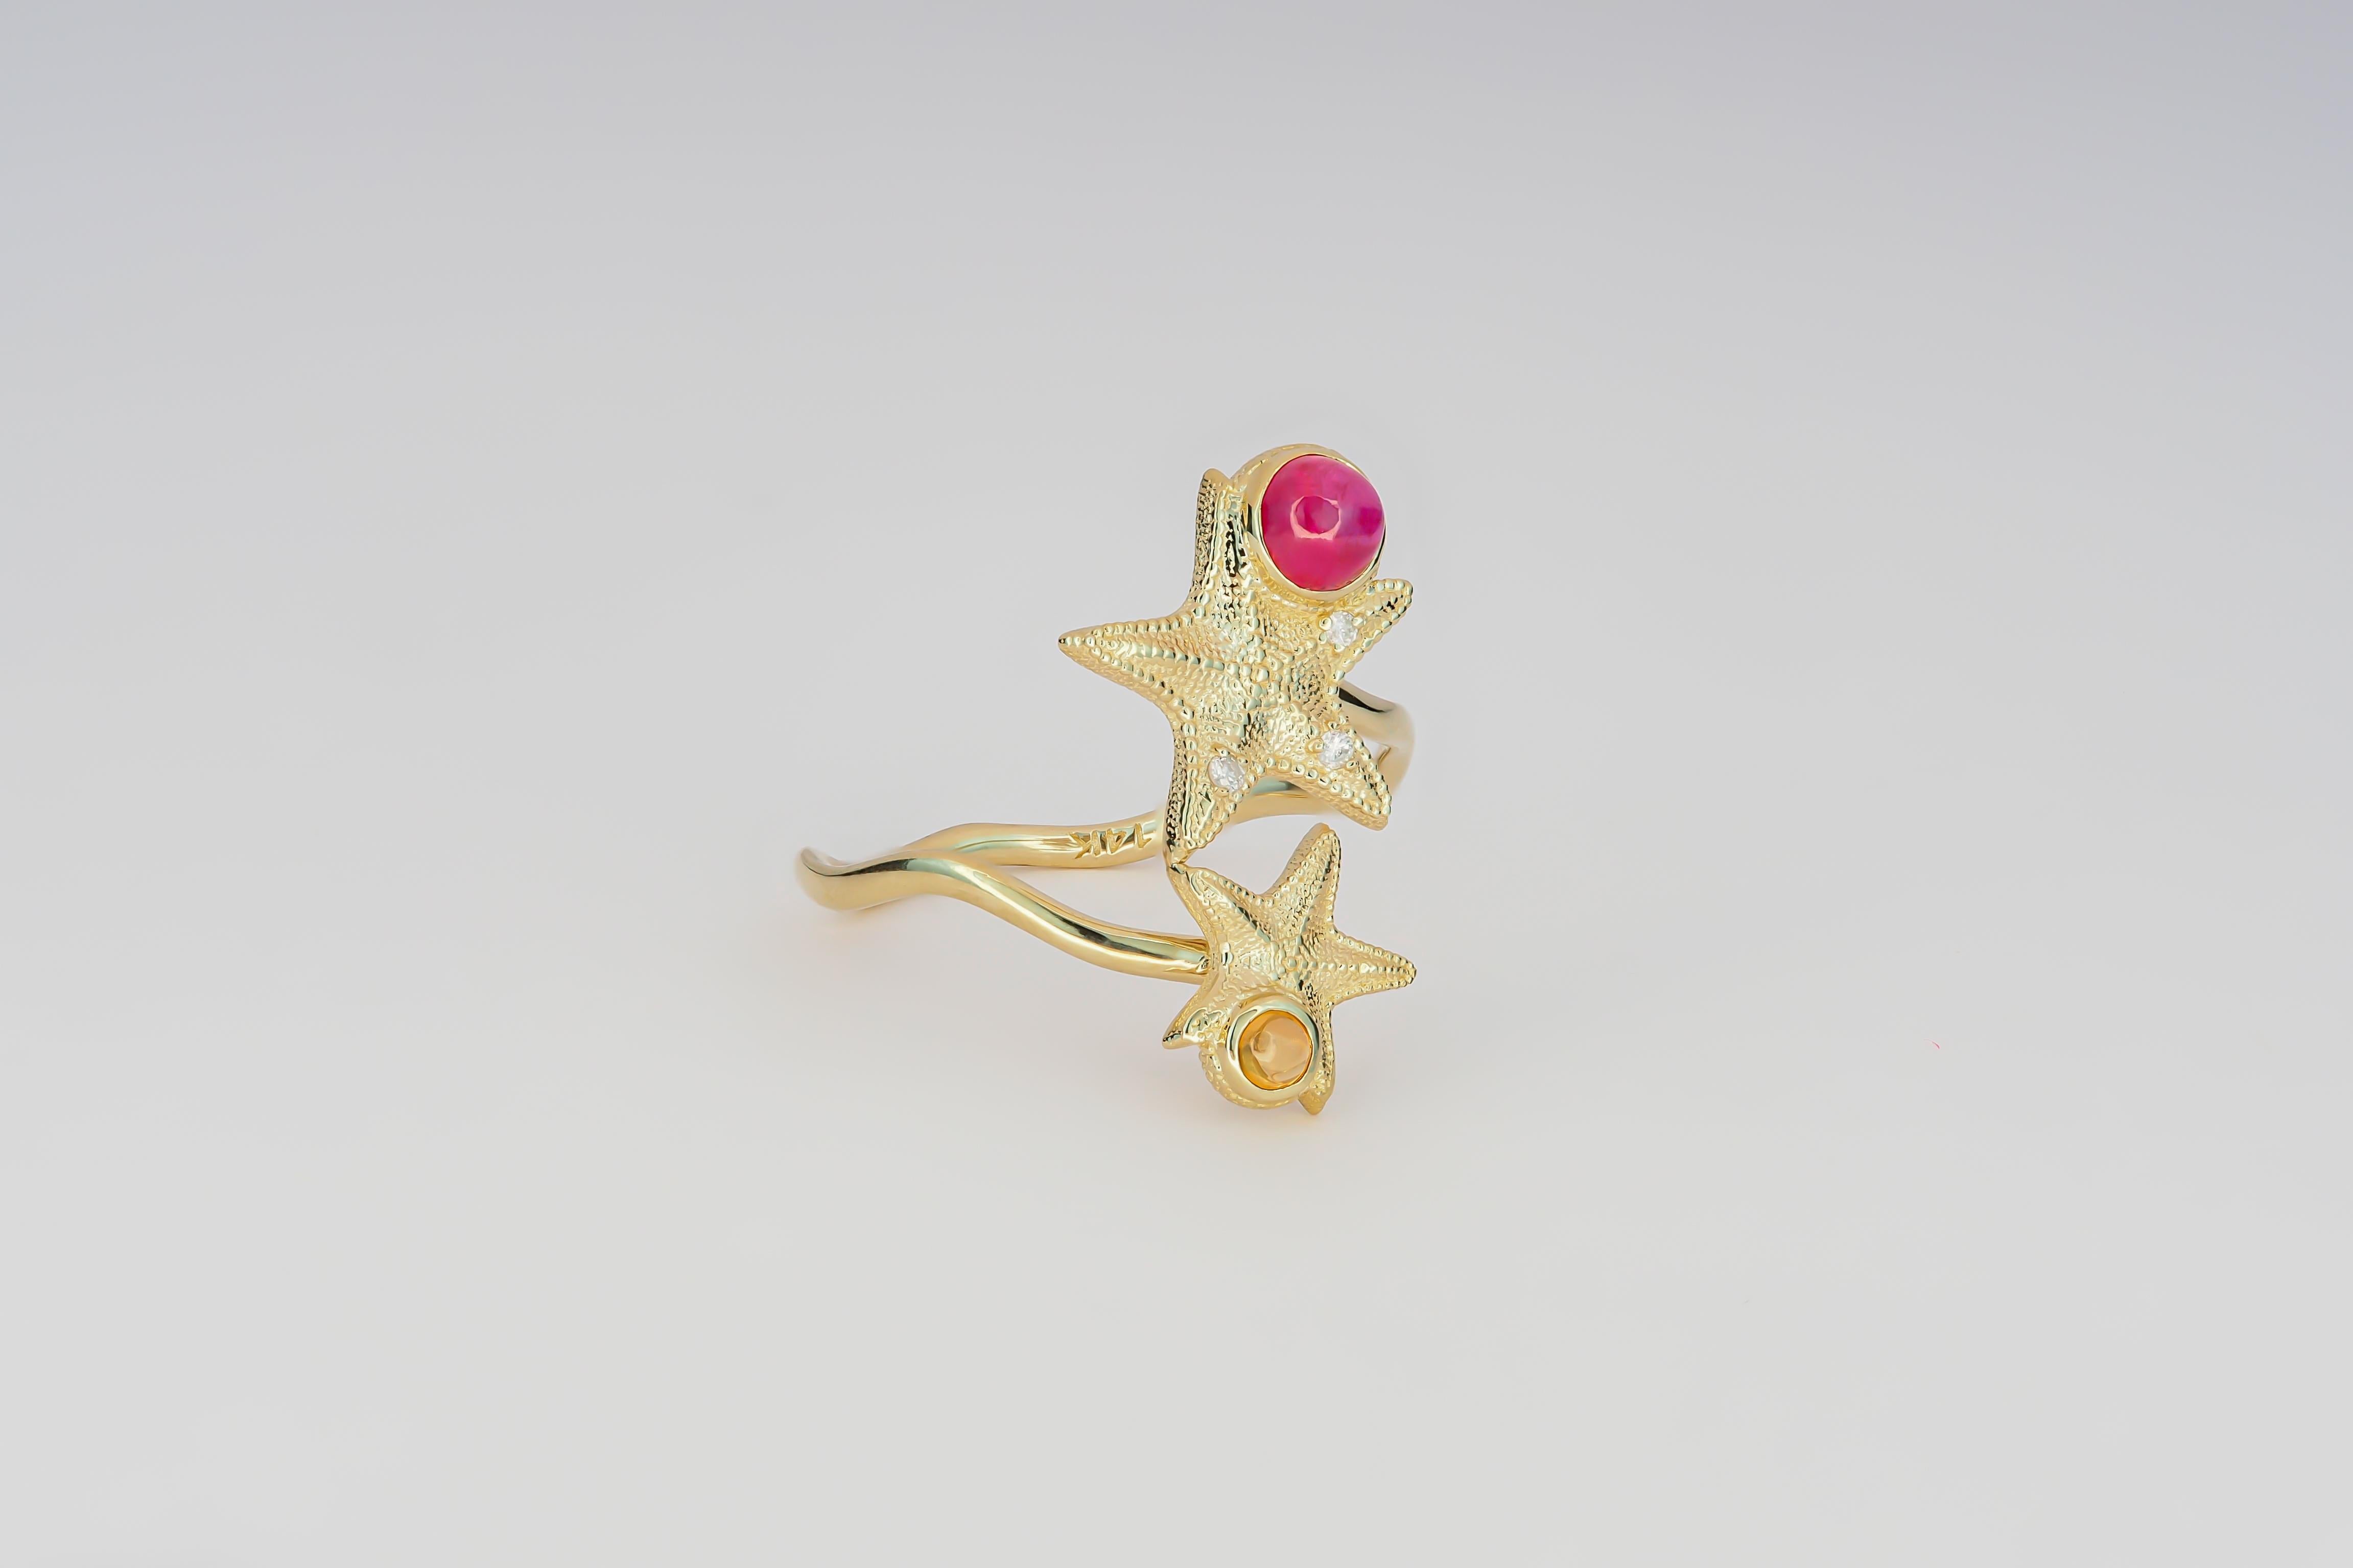 For Sale:   Ruby and Sapphire cabochon ring in 14 karat gold.  Star Fish Ring! 2